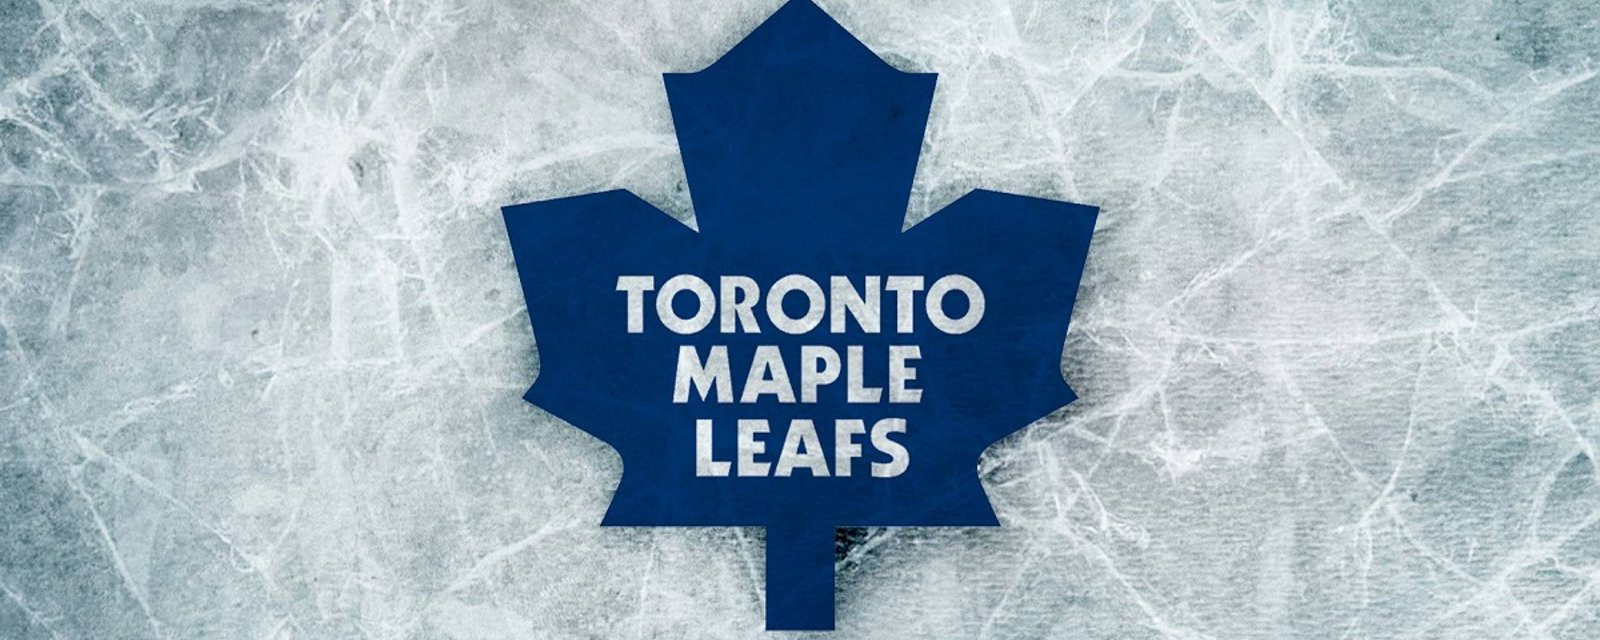 Leafs acquire defenseman in bizarre transaction on Tuesday.